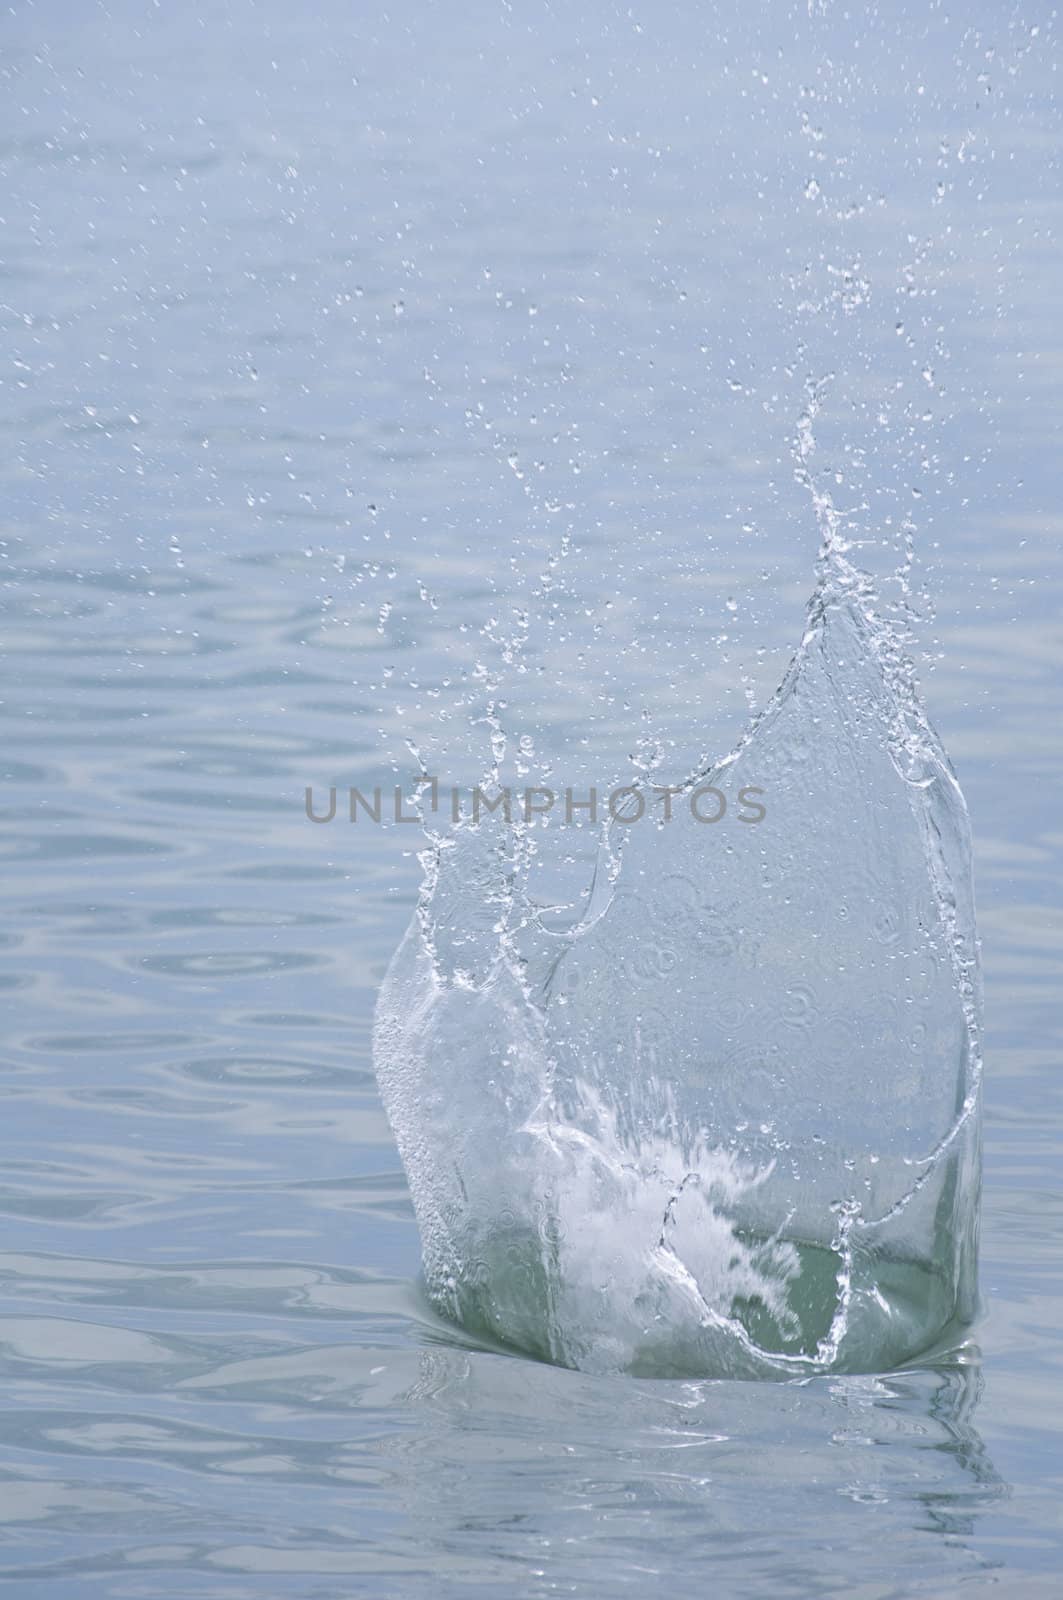 The spray of water in the sea